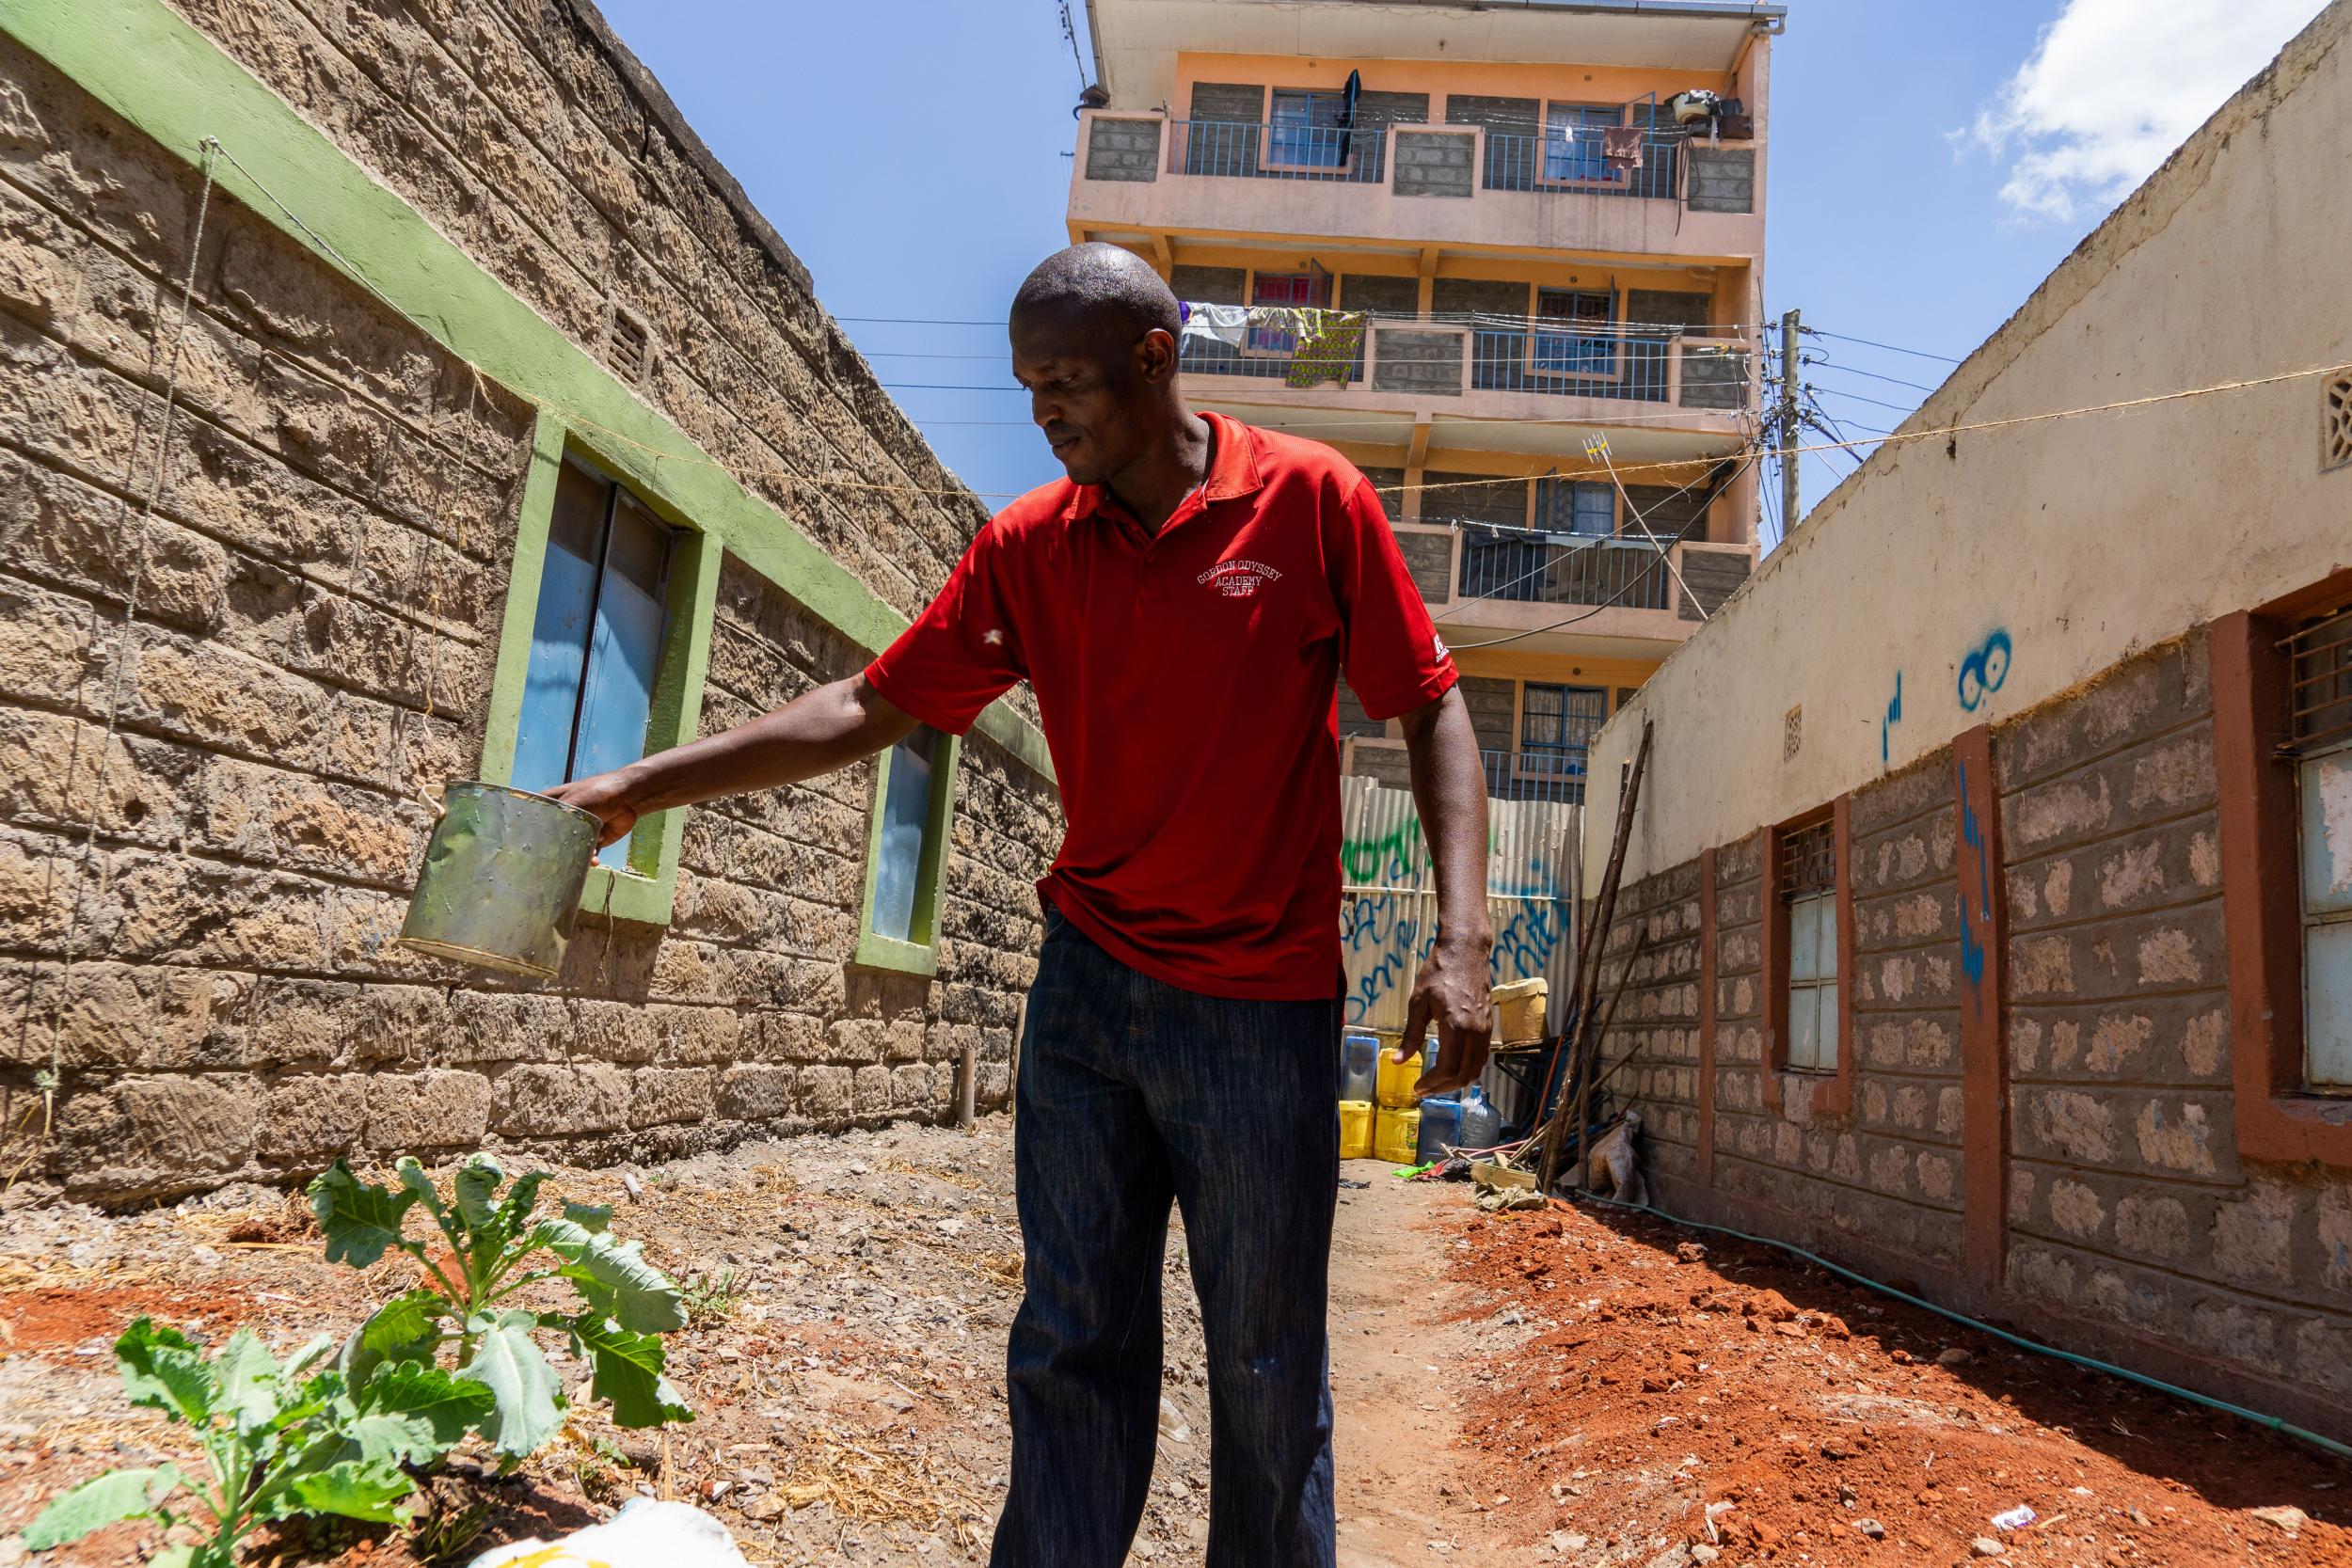 Charles Owino tends to the vegetable garden in an alleyway that used to be a hotspot for criminals and drug dealers